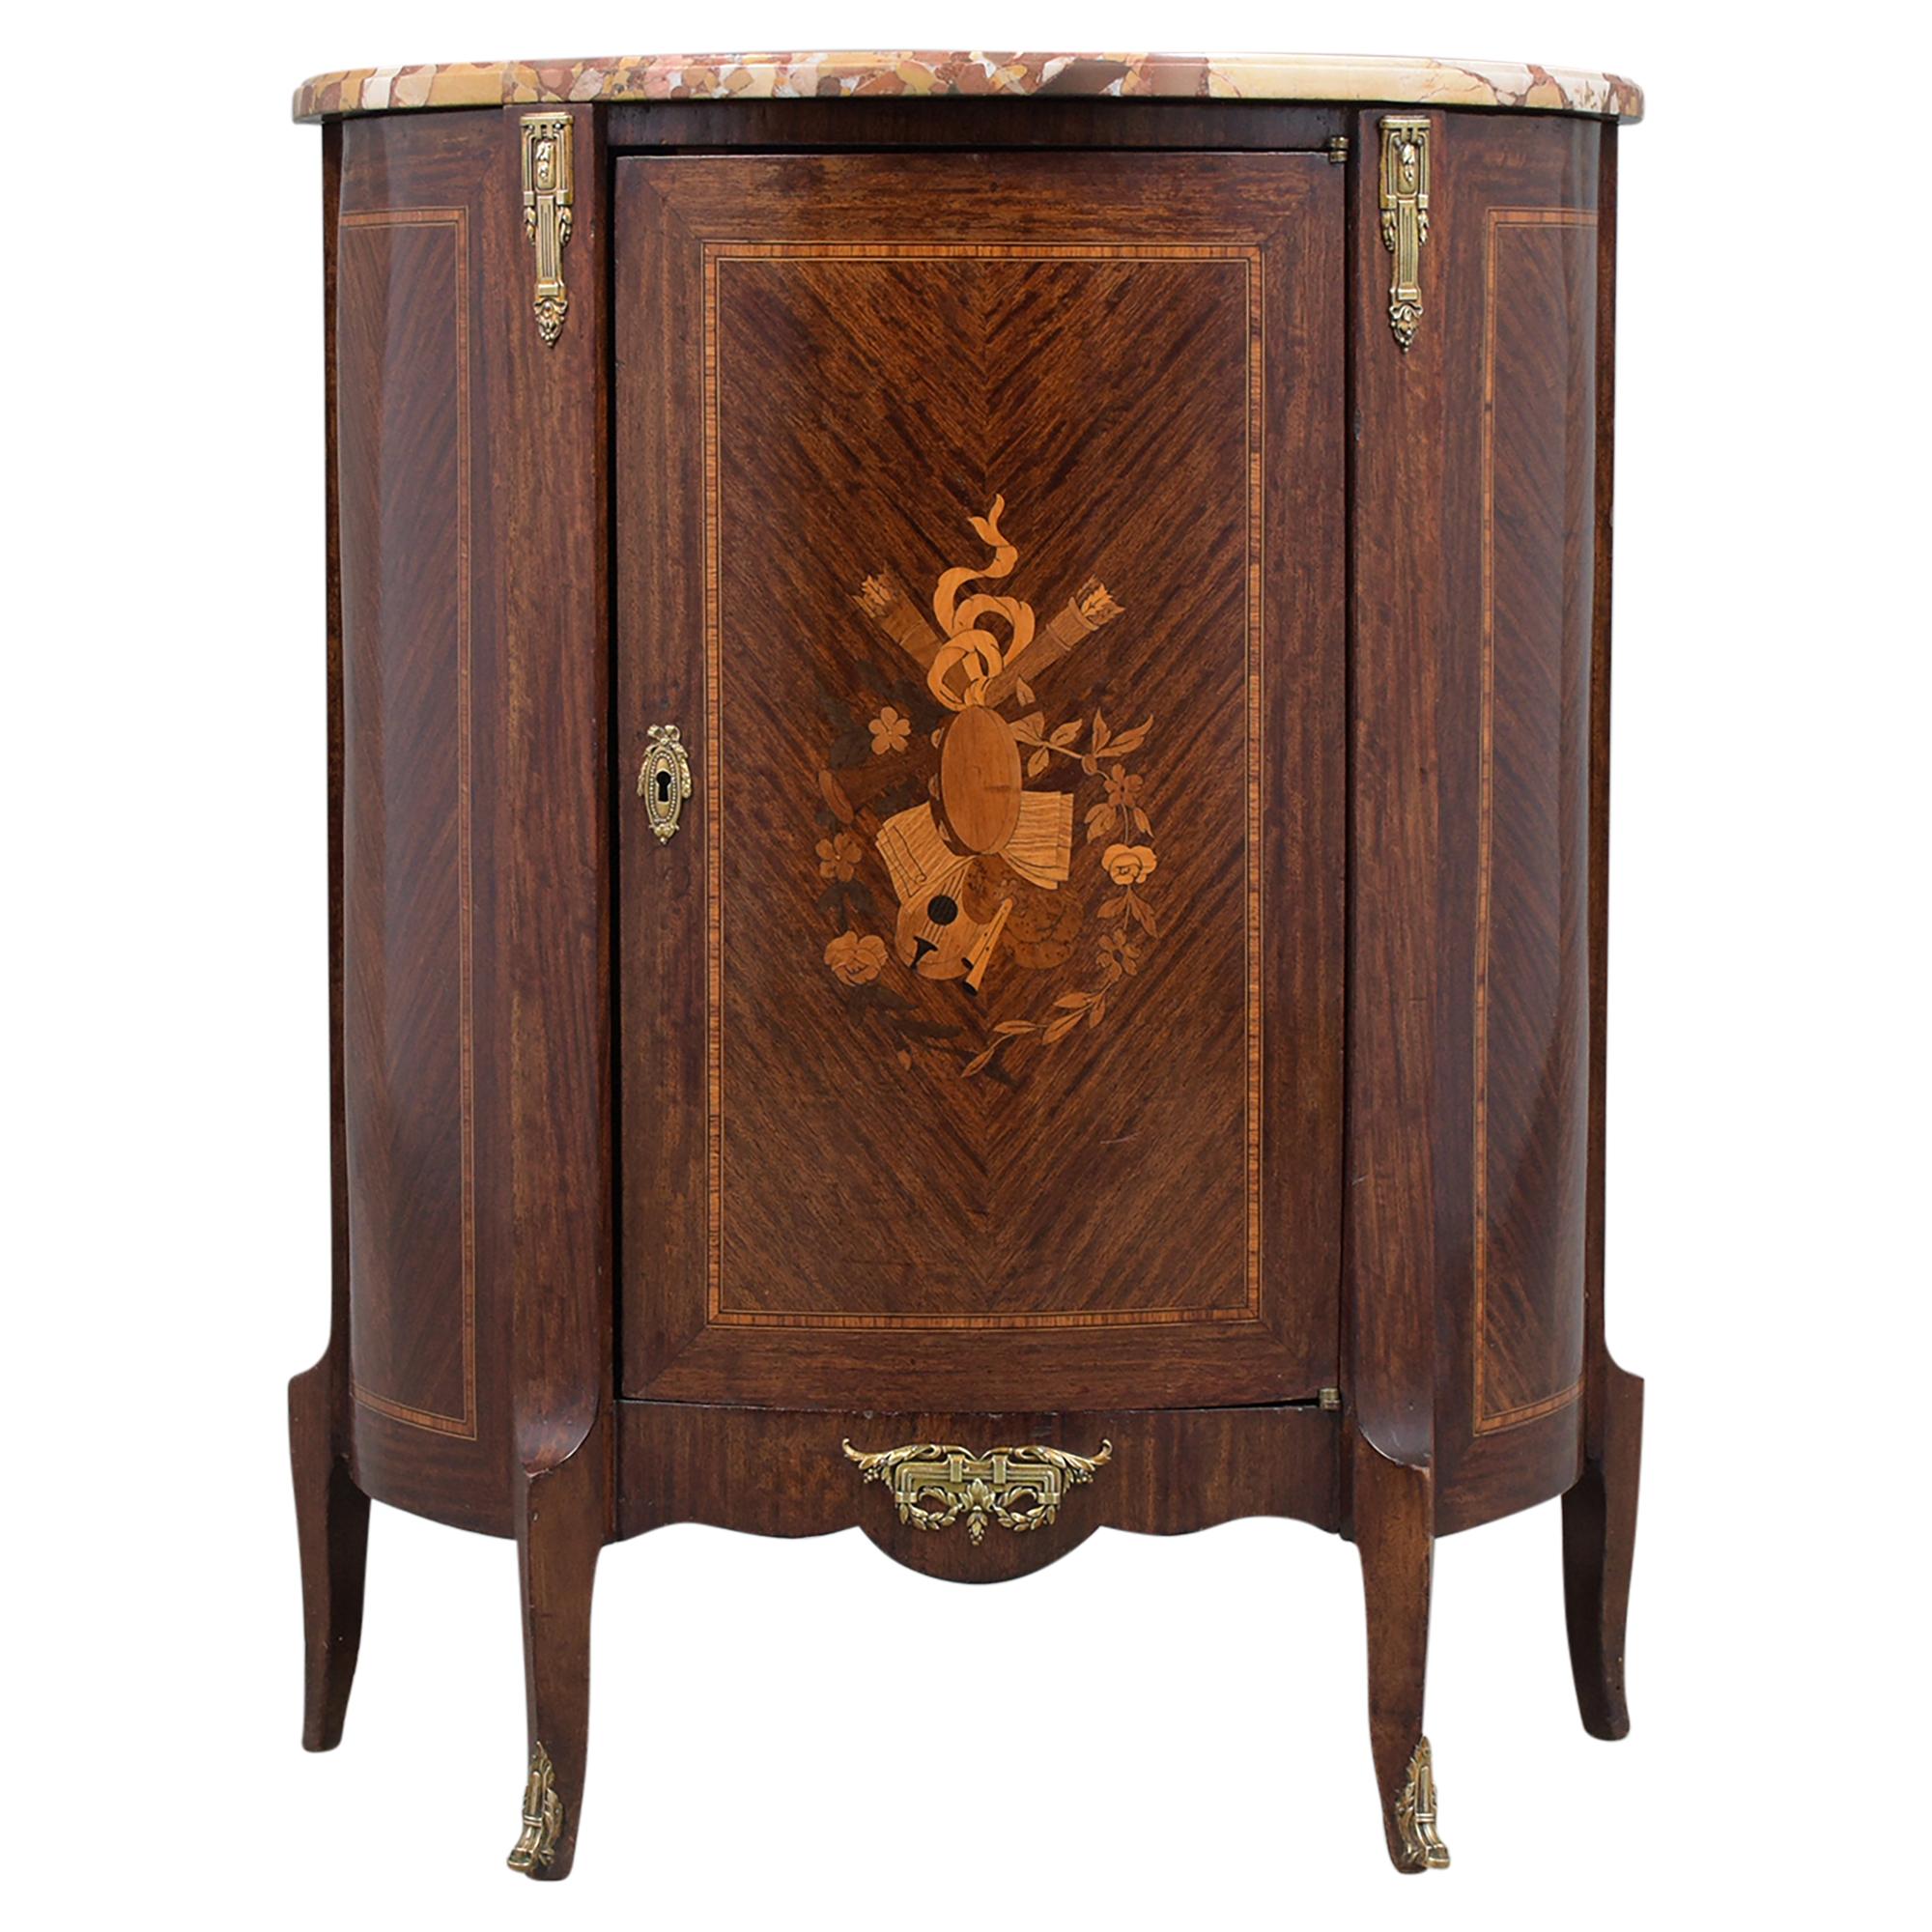 An elegant 19th century French Louis XVI small commode hand-crafted out of mahogany wood, this lovely piece features a bevel marble top in great condition and its original mahogany color finish newly waxed and polished developing a beautiful patina